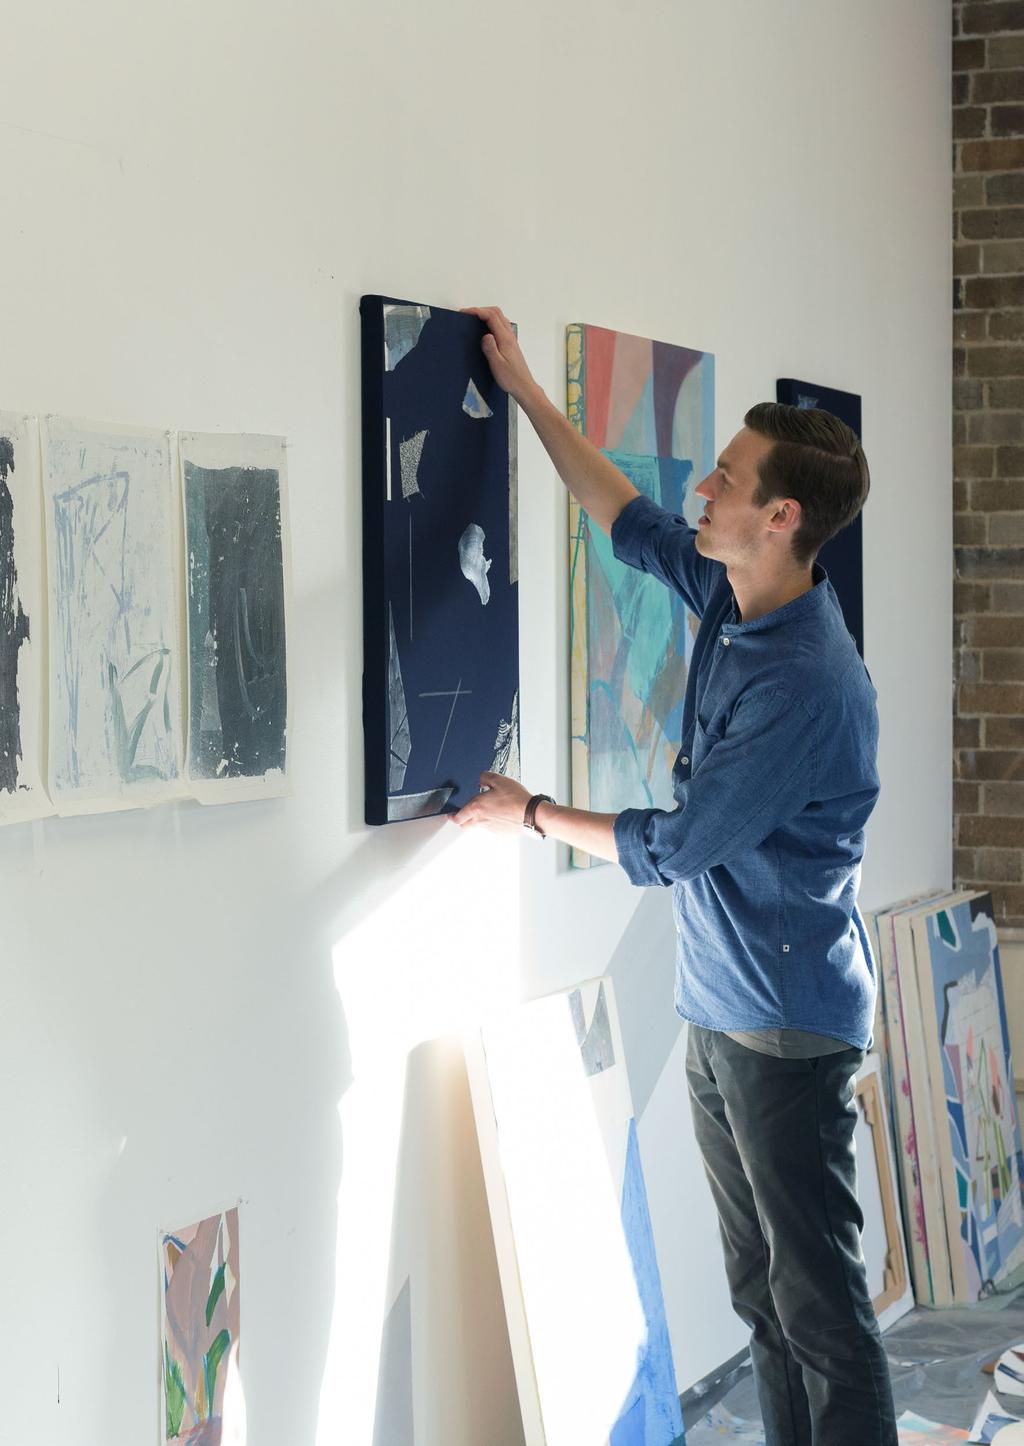 KEY FACTS General Seven non-residential studios are available for the 2019 Artspace One Year Studio Program, March 2019 February 2020.